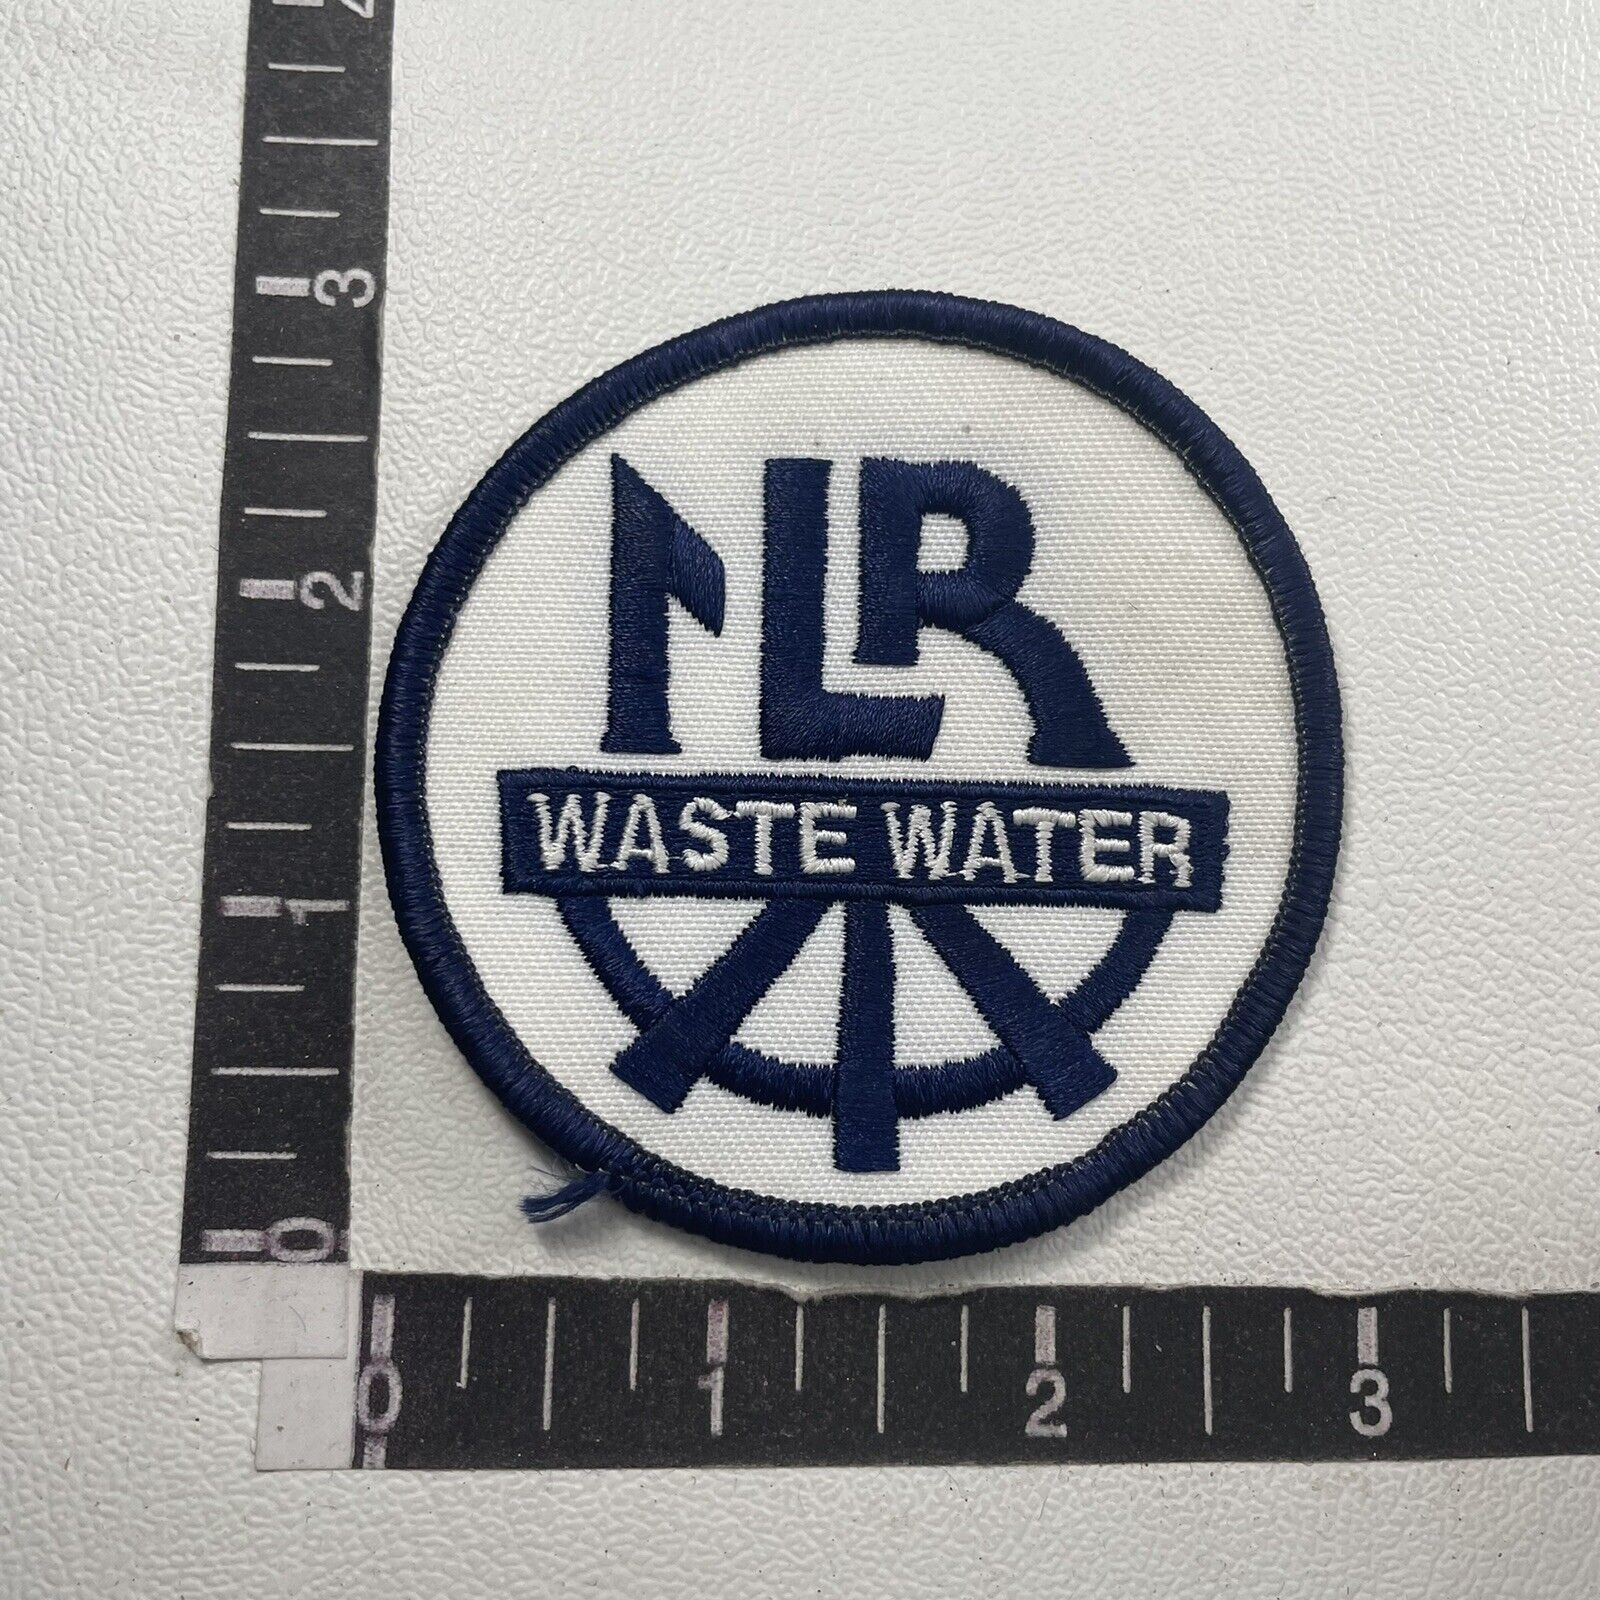 Maybe “LR” (not sure) Wastewater Waste Water Advertising Patch 10RE